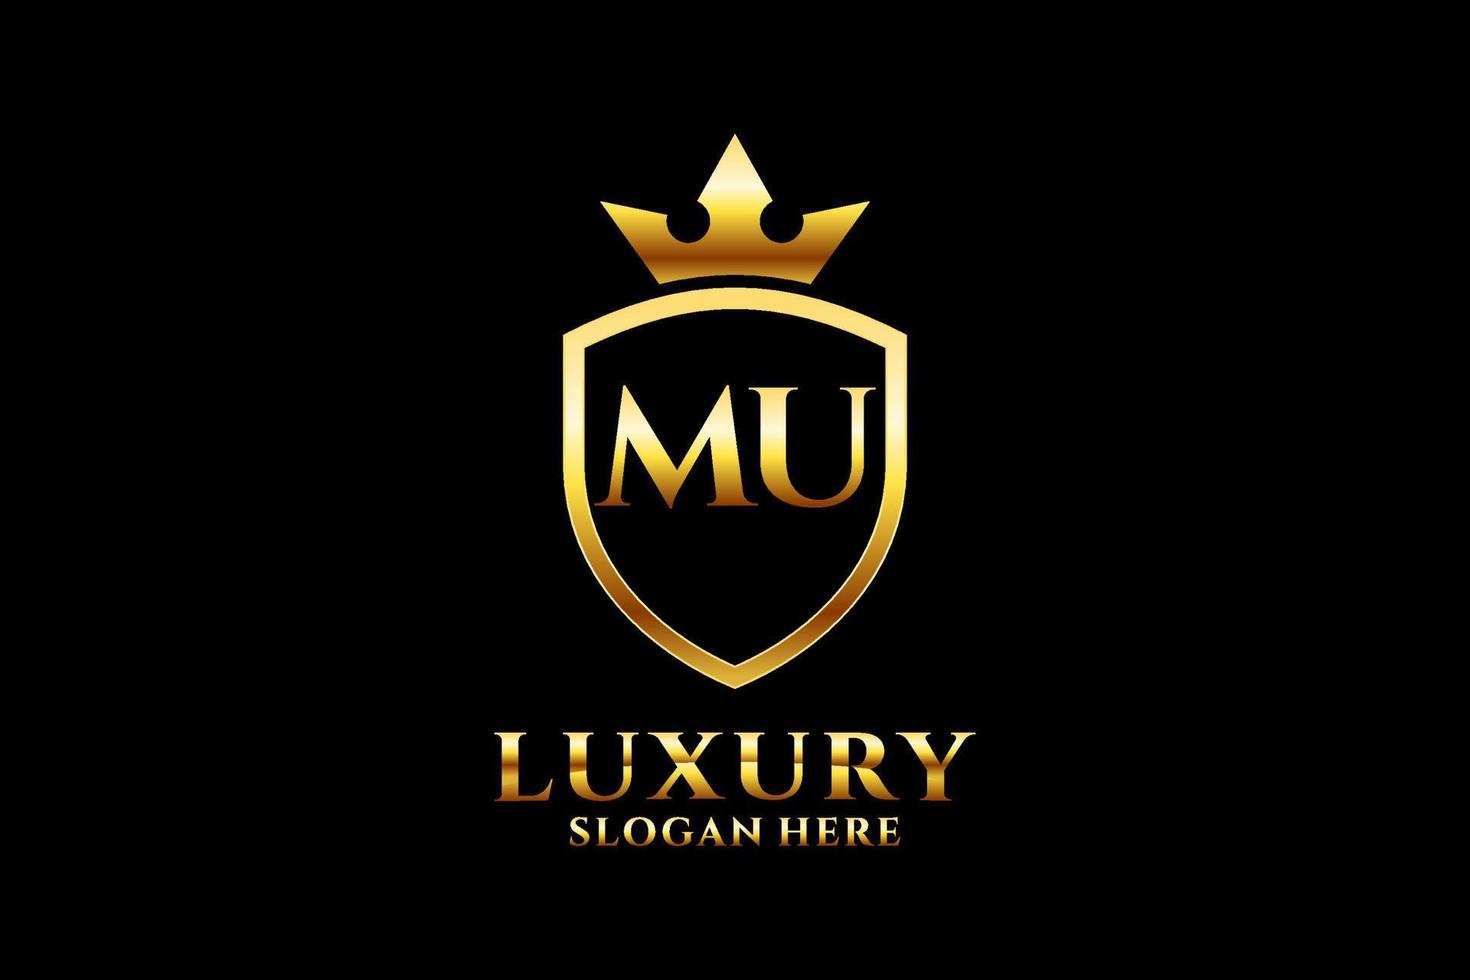 initial MU elegant luxury monogram logo or badge template with scrolls and royal crown - perfect for luxurious branding projects vector